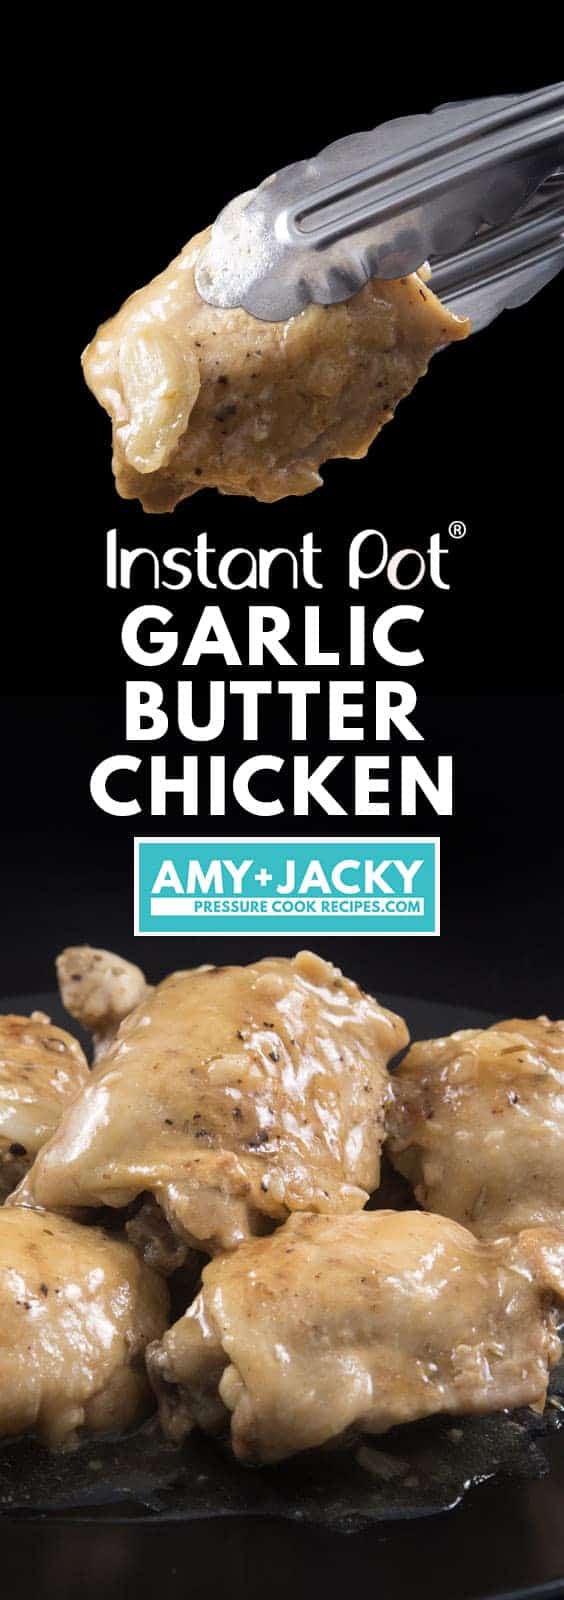 Make this Quick and Easy Instant Pot Garlic Butter Chicken Recipe (Pressure Cooker Garlic Butter Chicken). Buttery comforting chicken thighs packed with sweet and savory garlicky aroma. Perfect family meal for hectic weeknights!